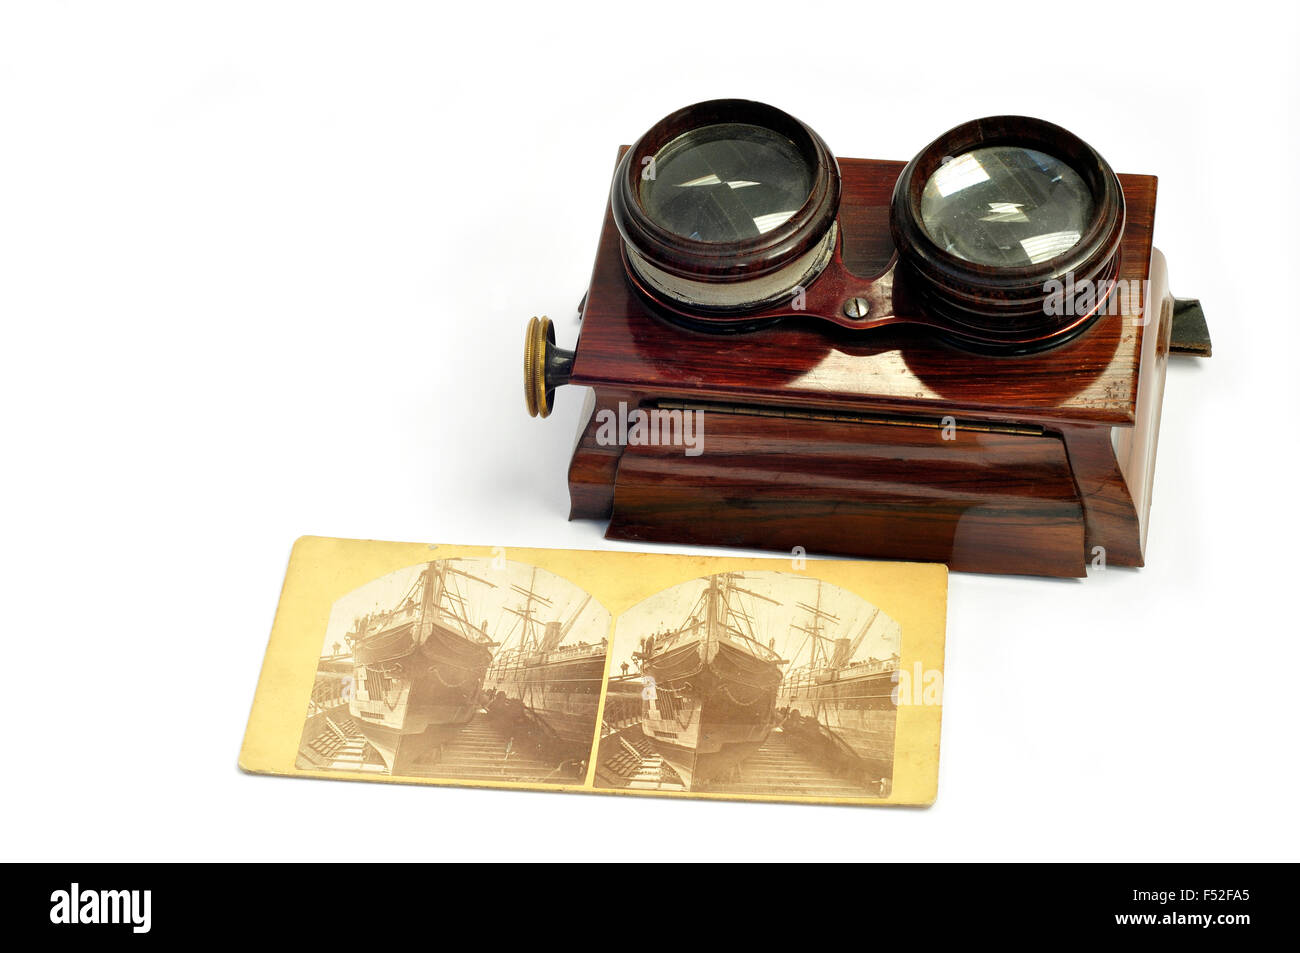 Mascher's Stereoscope, used for Viewing Stereoscopic Photo Stock Photo